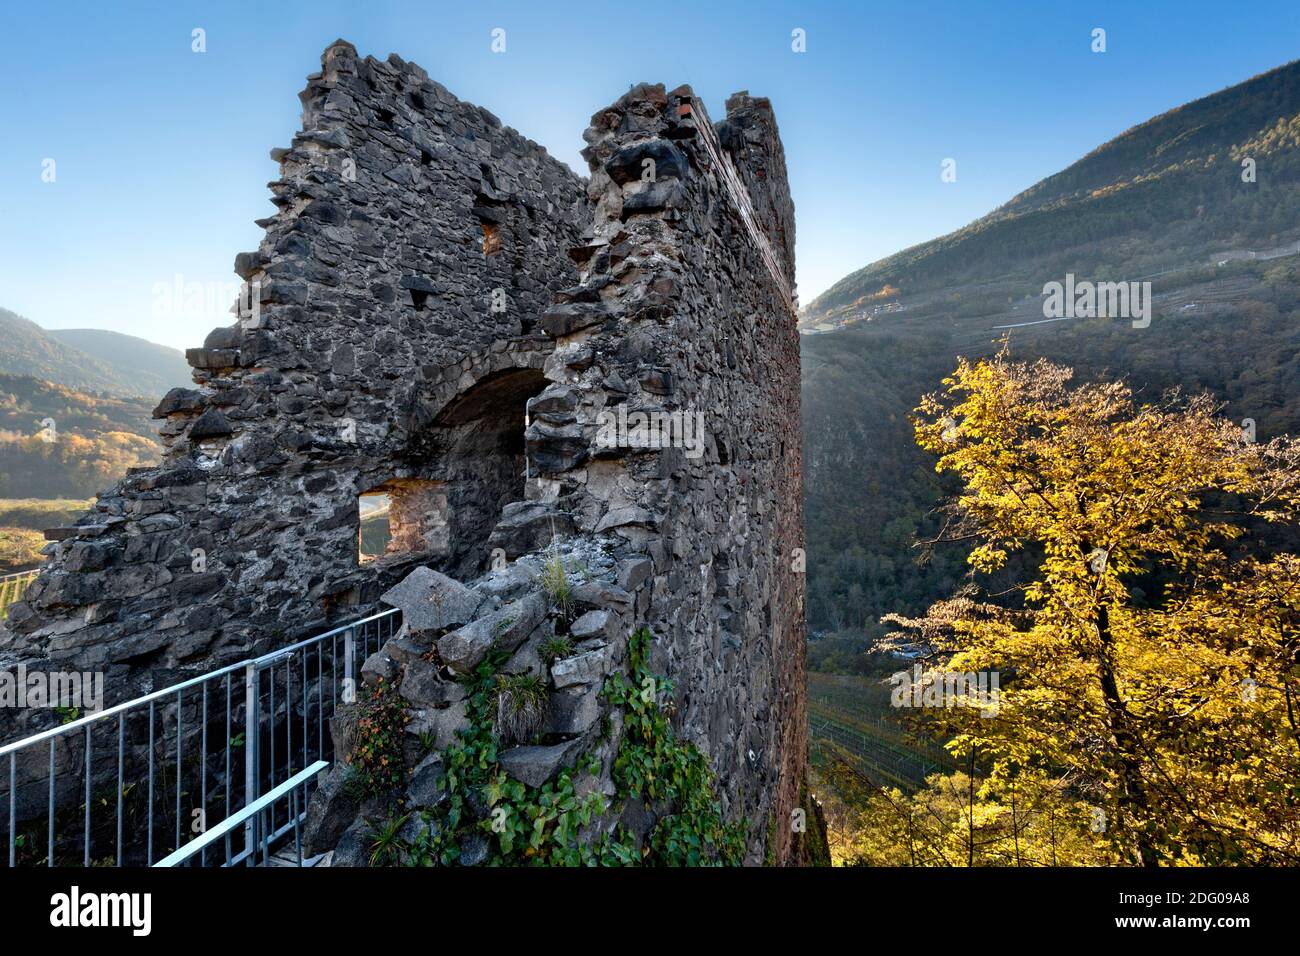 Ruins of a tower of the medieval castle of Segonzano. Cembra valley, Trento province, Trentino Alto-Adige, Italy, Europe. Stock Photo